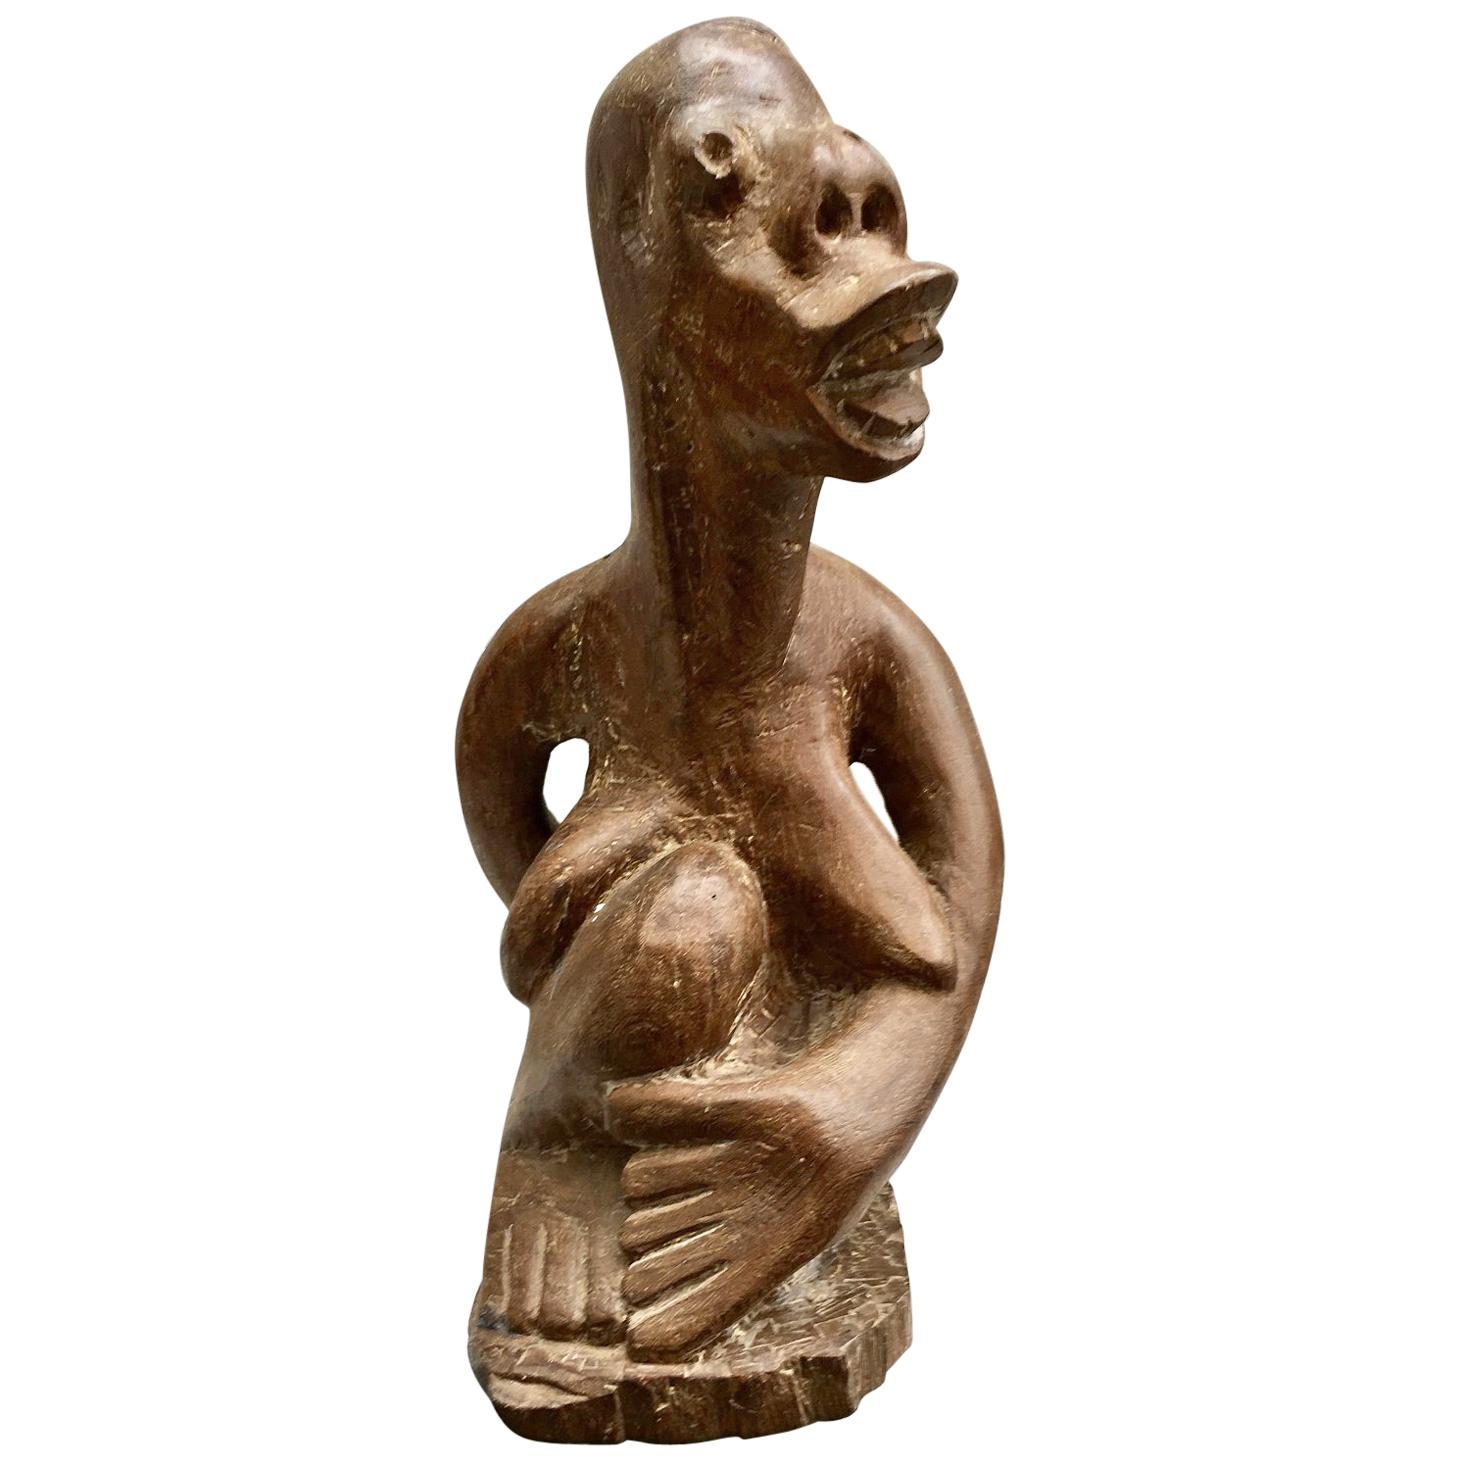 South African Tribal Carved Wooden Figure of Naked Lady by G. Tandi, circa 1960s